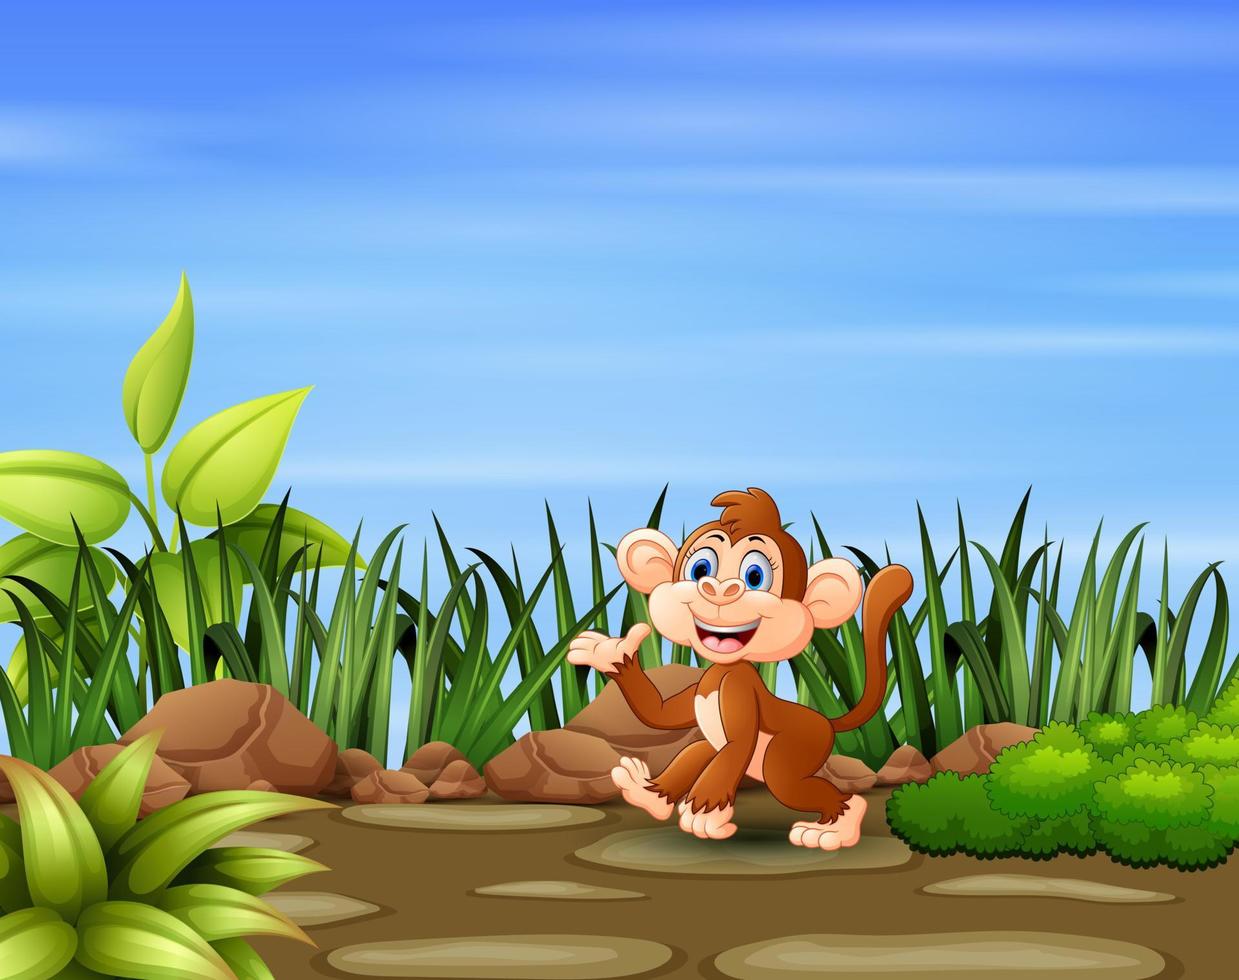 A monkey playing in the garden vector